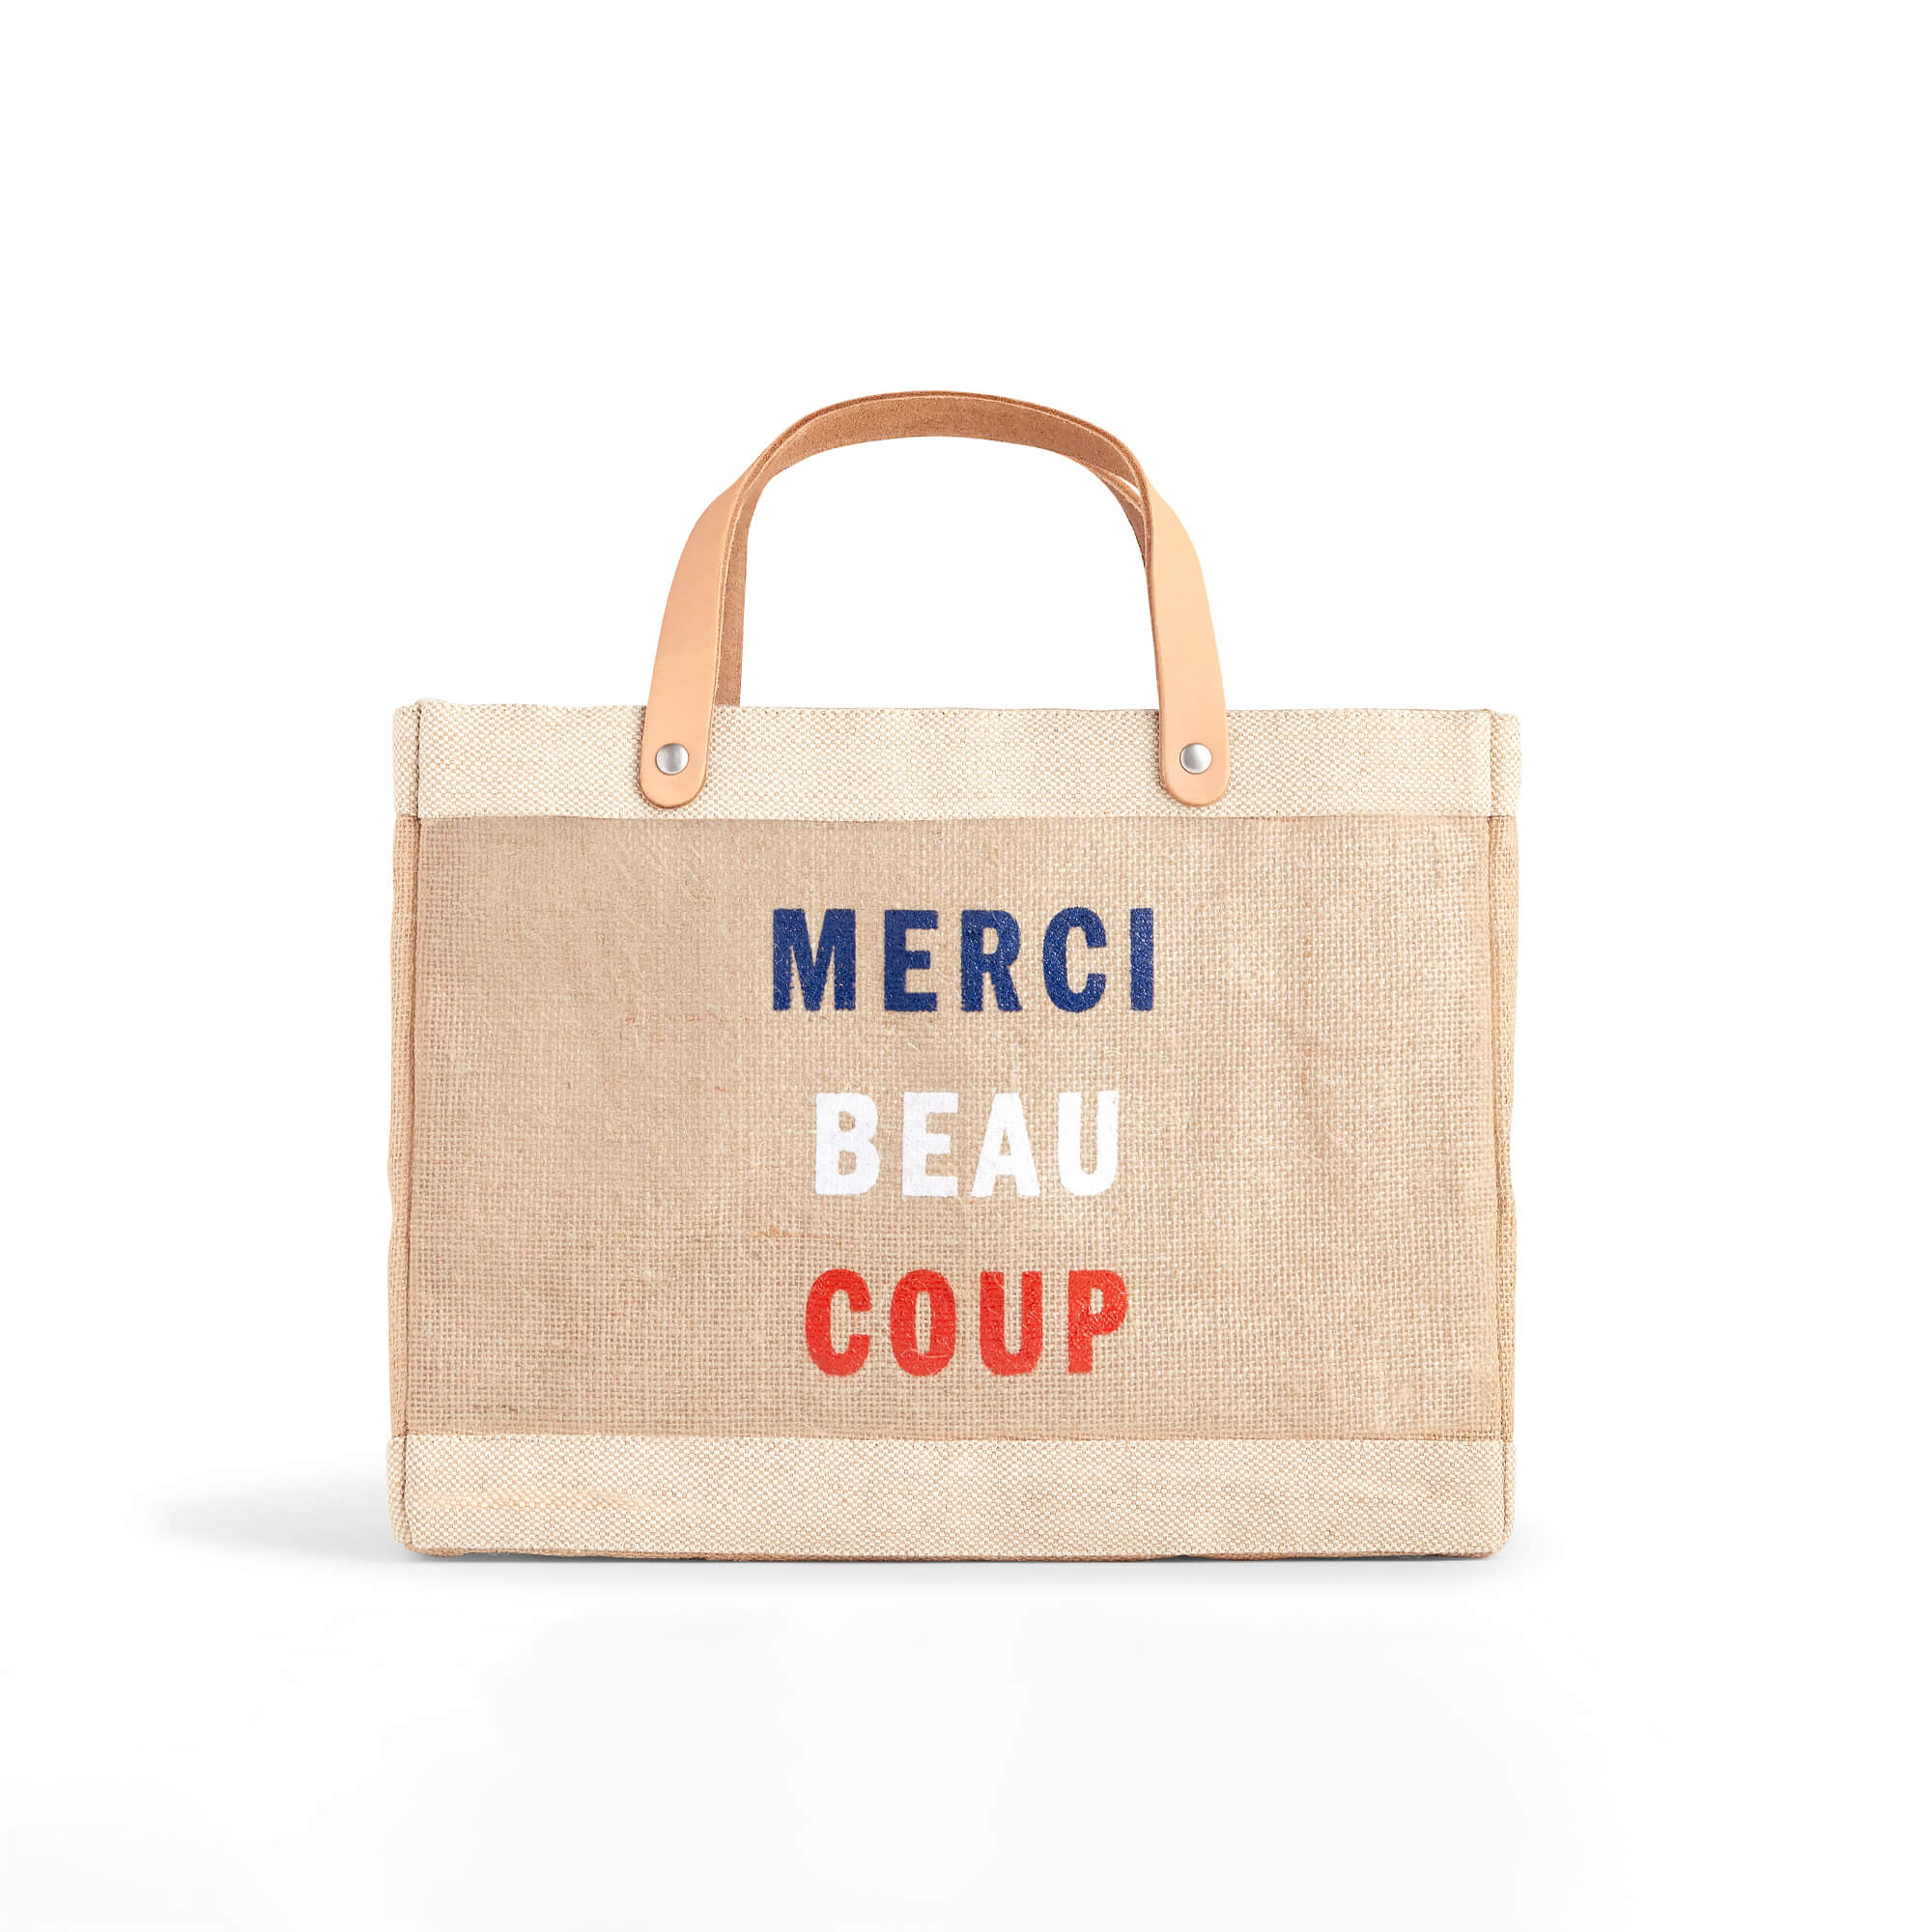 Petite Market Bag in Natural for Clare V. “Merci Beau Coup” with Heart